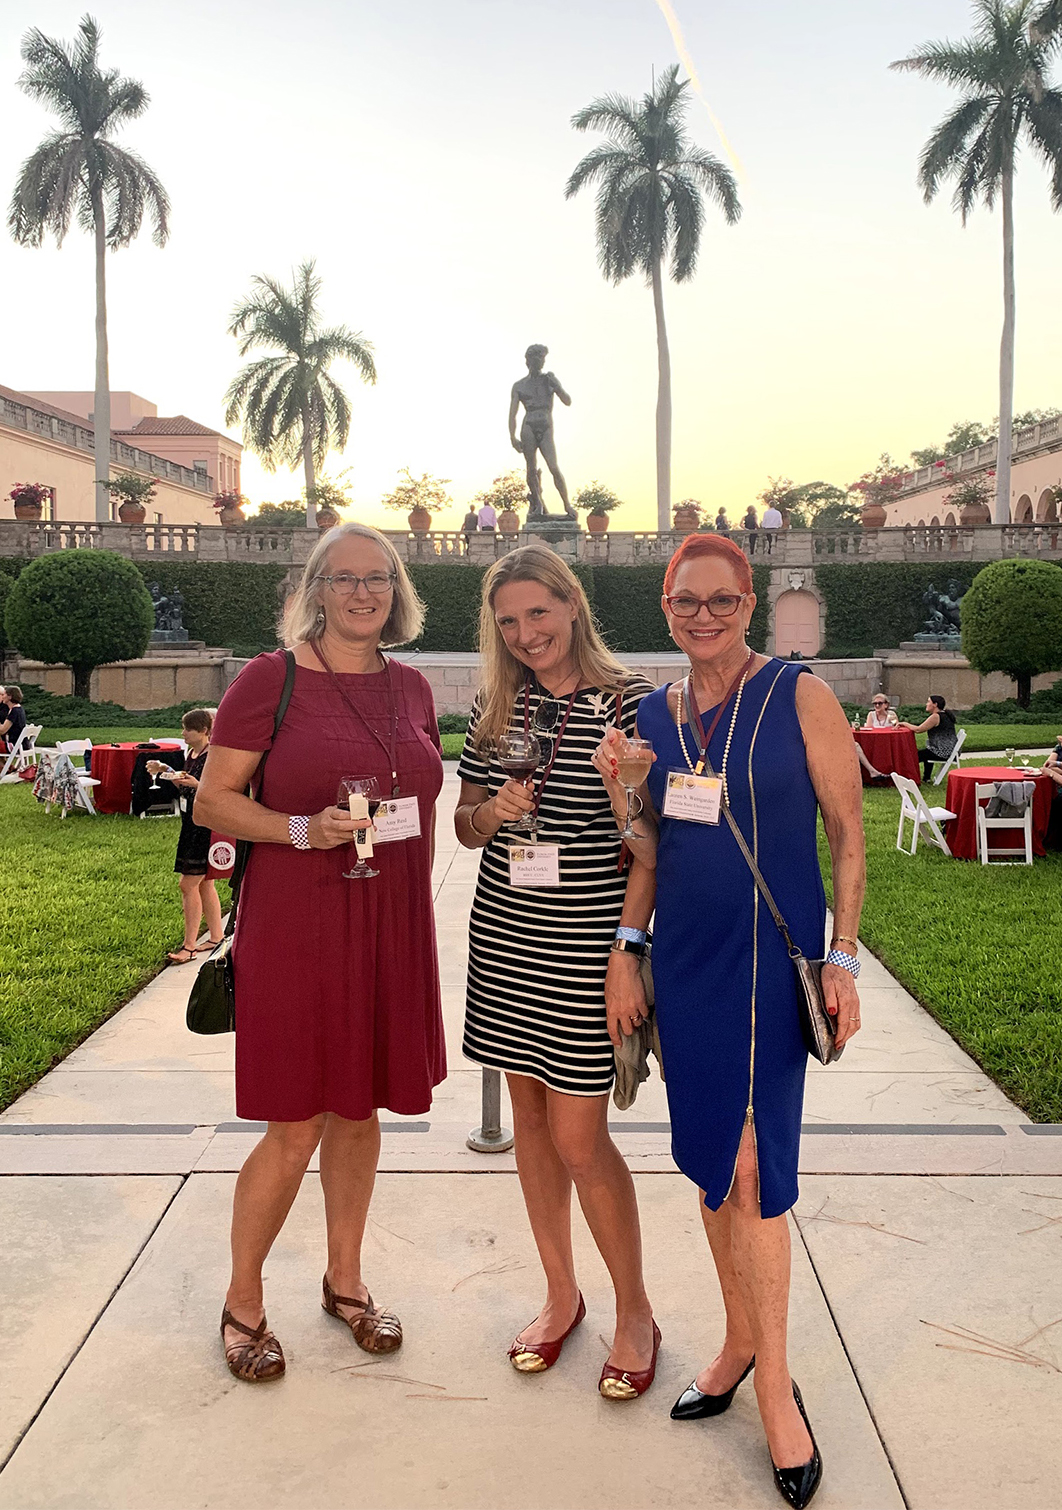 Dr. Weingarden with conference participants in The Ringling courtyard